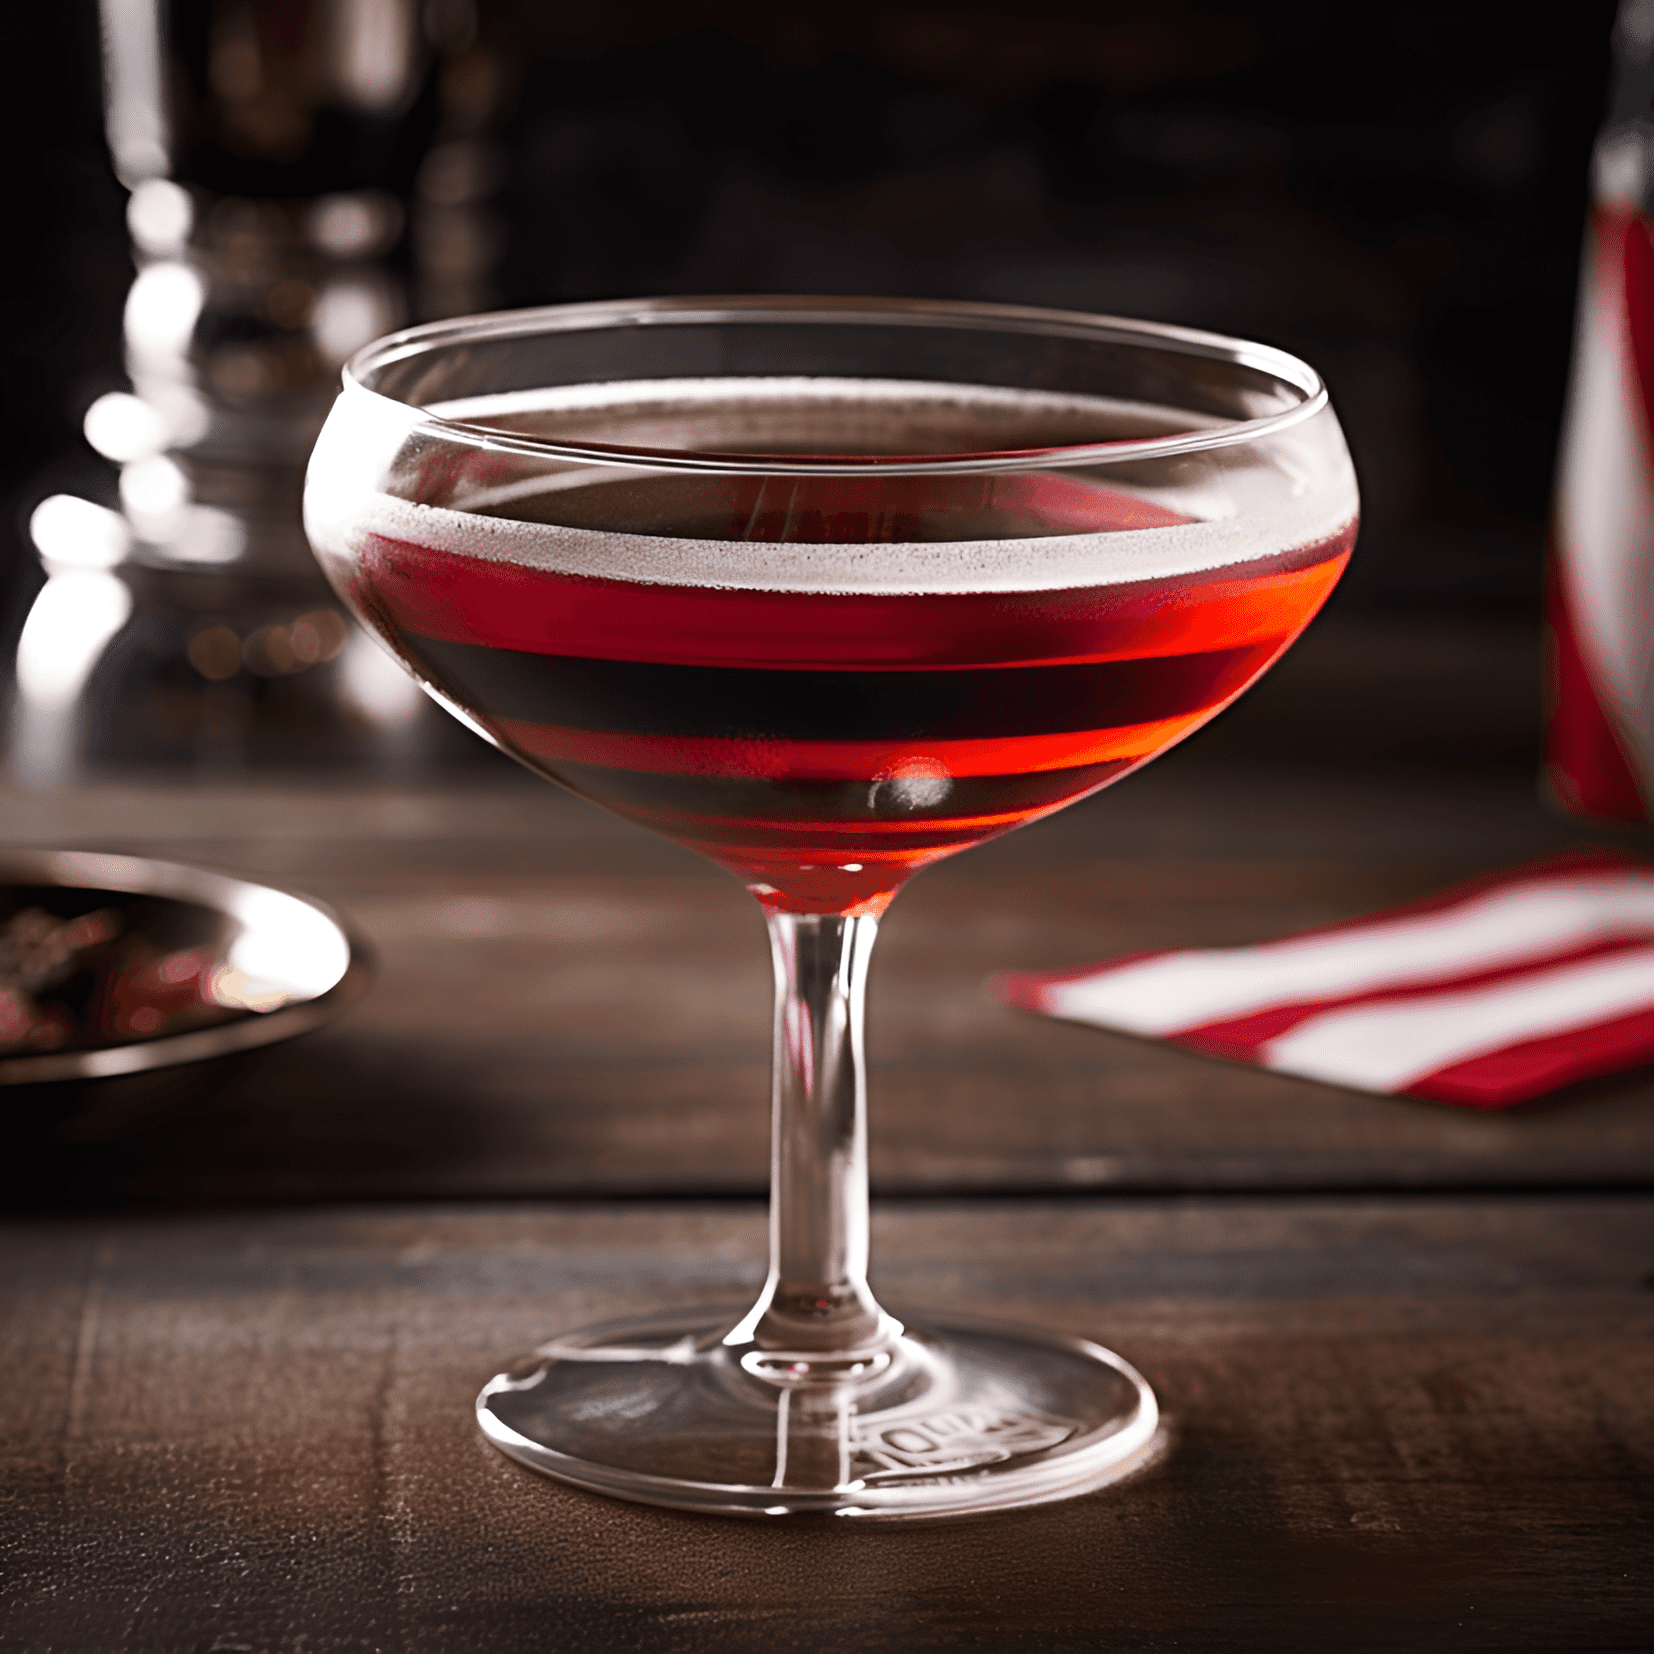 The Betsy Ross cocktail has a rich, velvety texture with a hint of sweetness from the port wine. The brandy adds warmth and depth, while the orange liqueur brings a touch of citrus brightness. The nutmeg garnish enhances the overall flavor with a subtle spiciness.